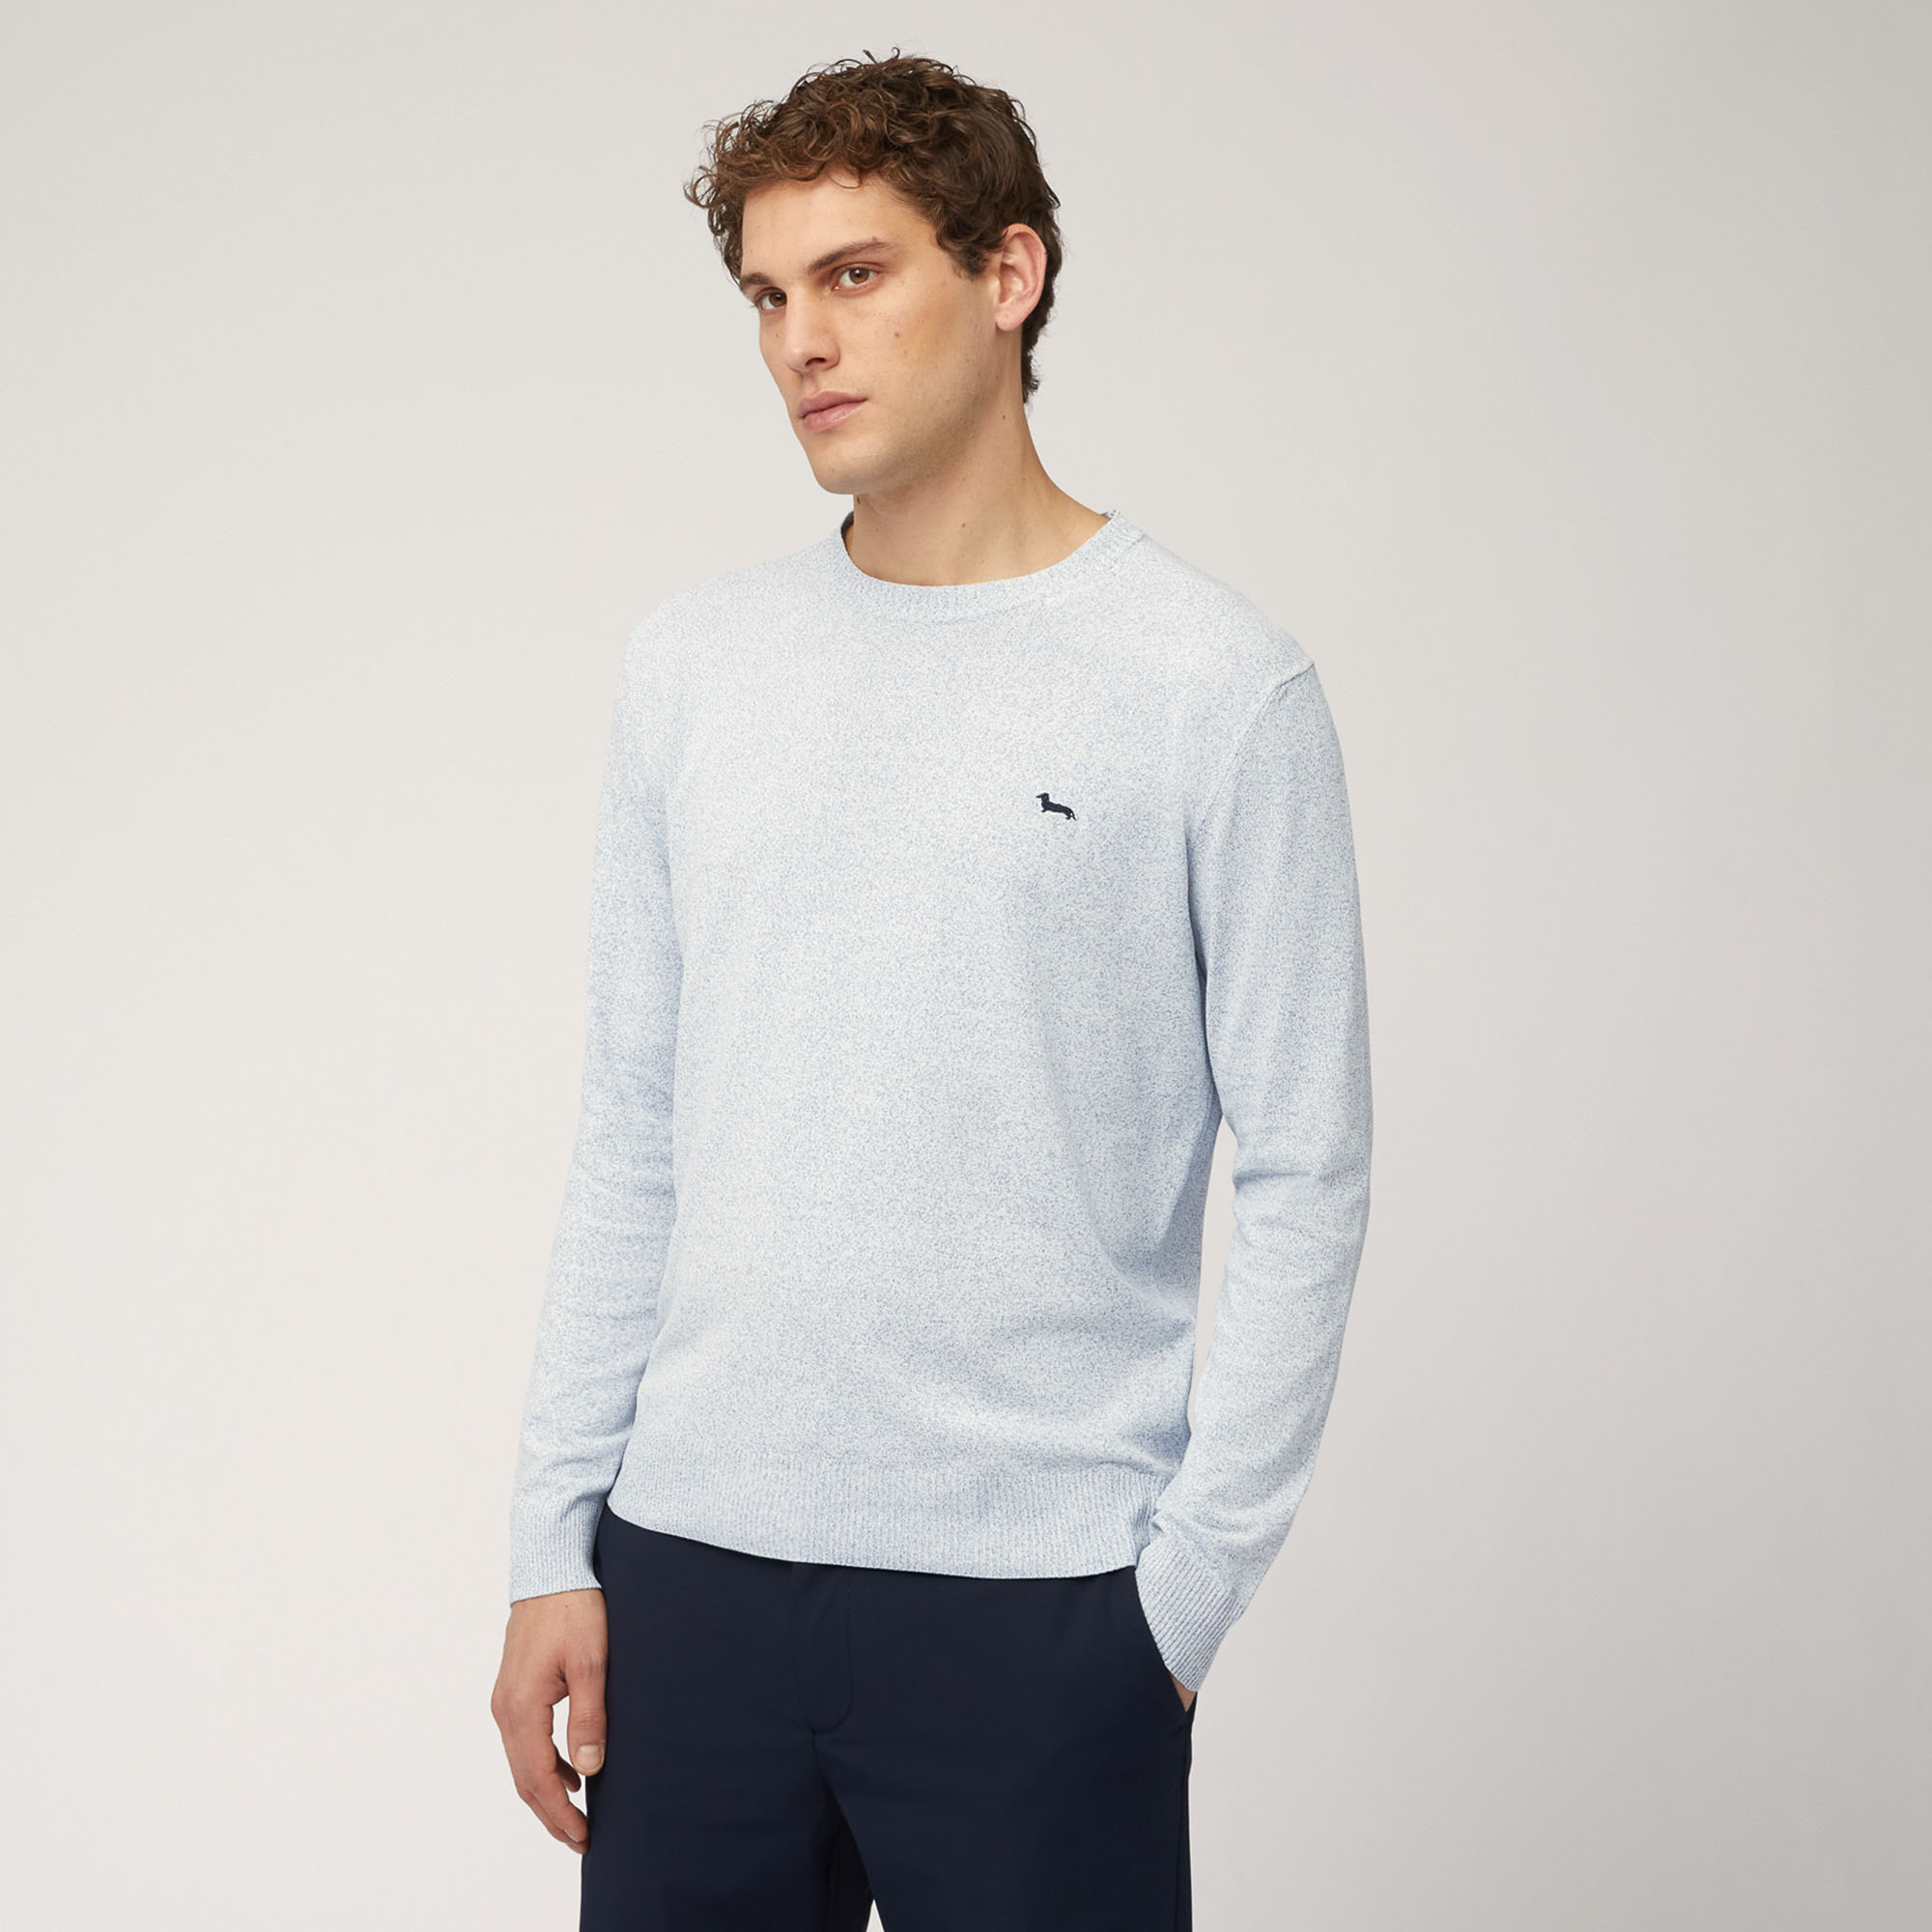 Crew Neck Pullover in Technical Yarn